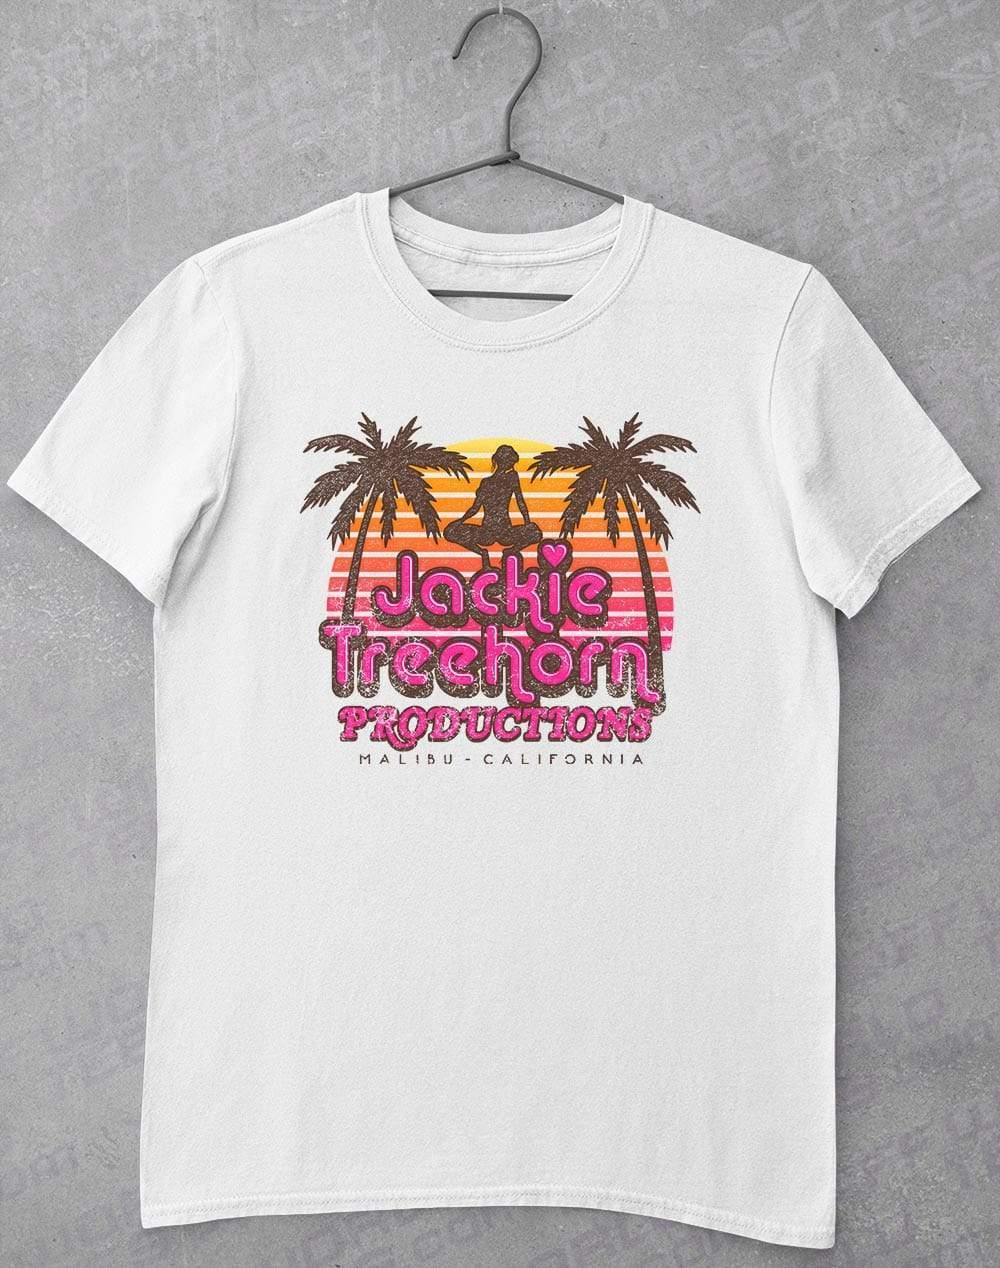 Jackie Treehorn Productions T-Shirt S / White  - Off World Tees